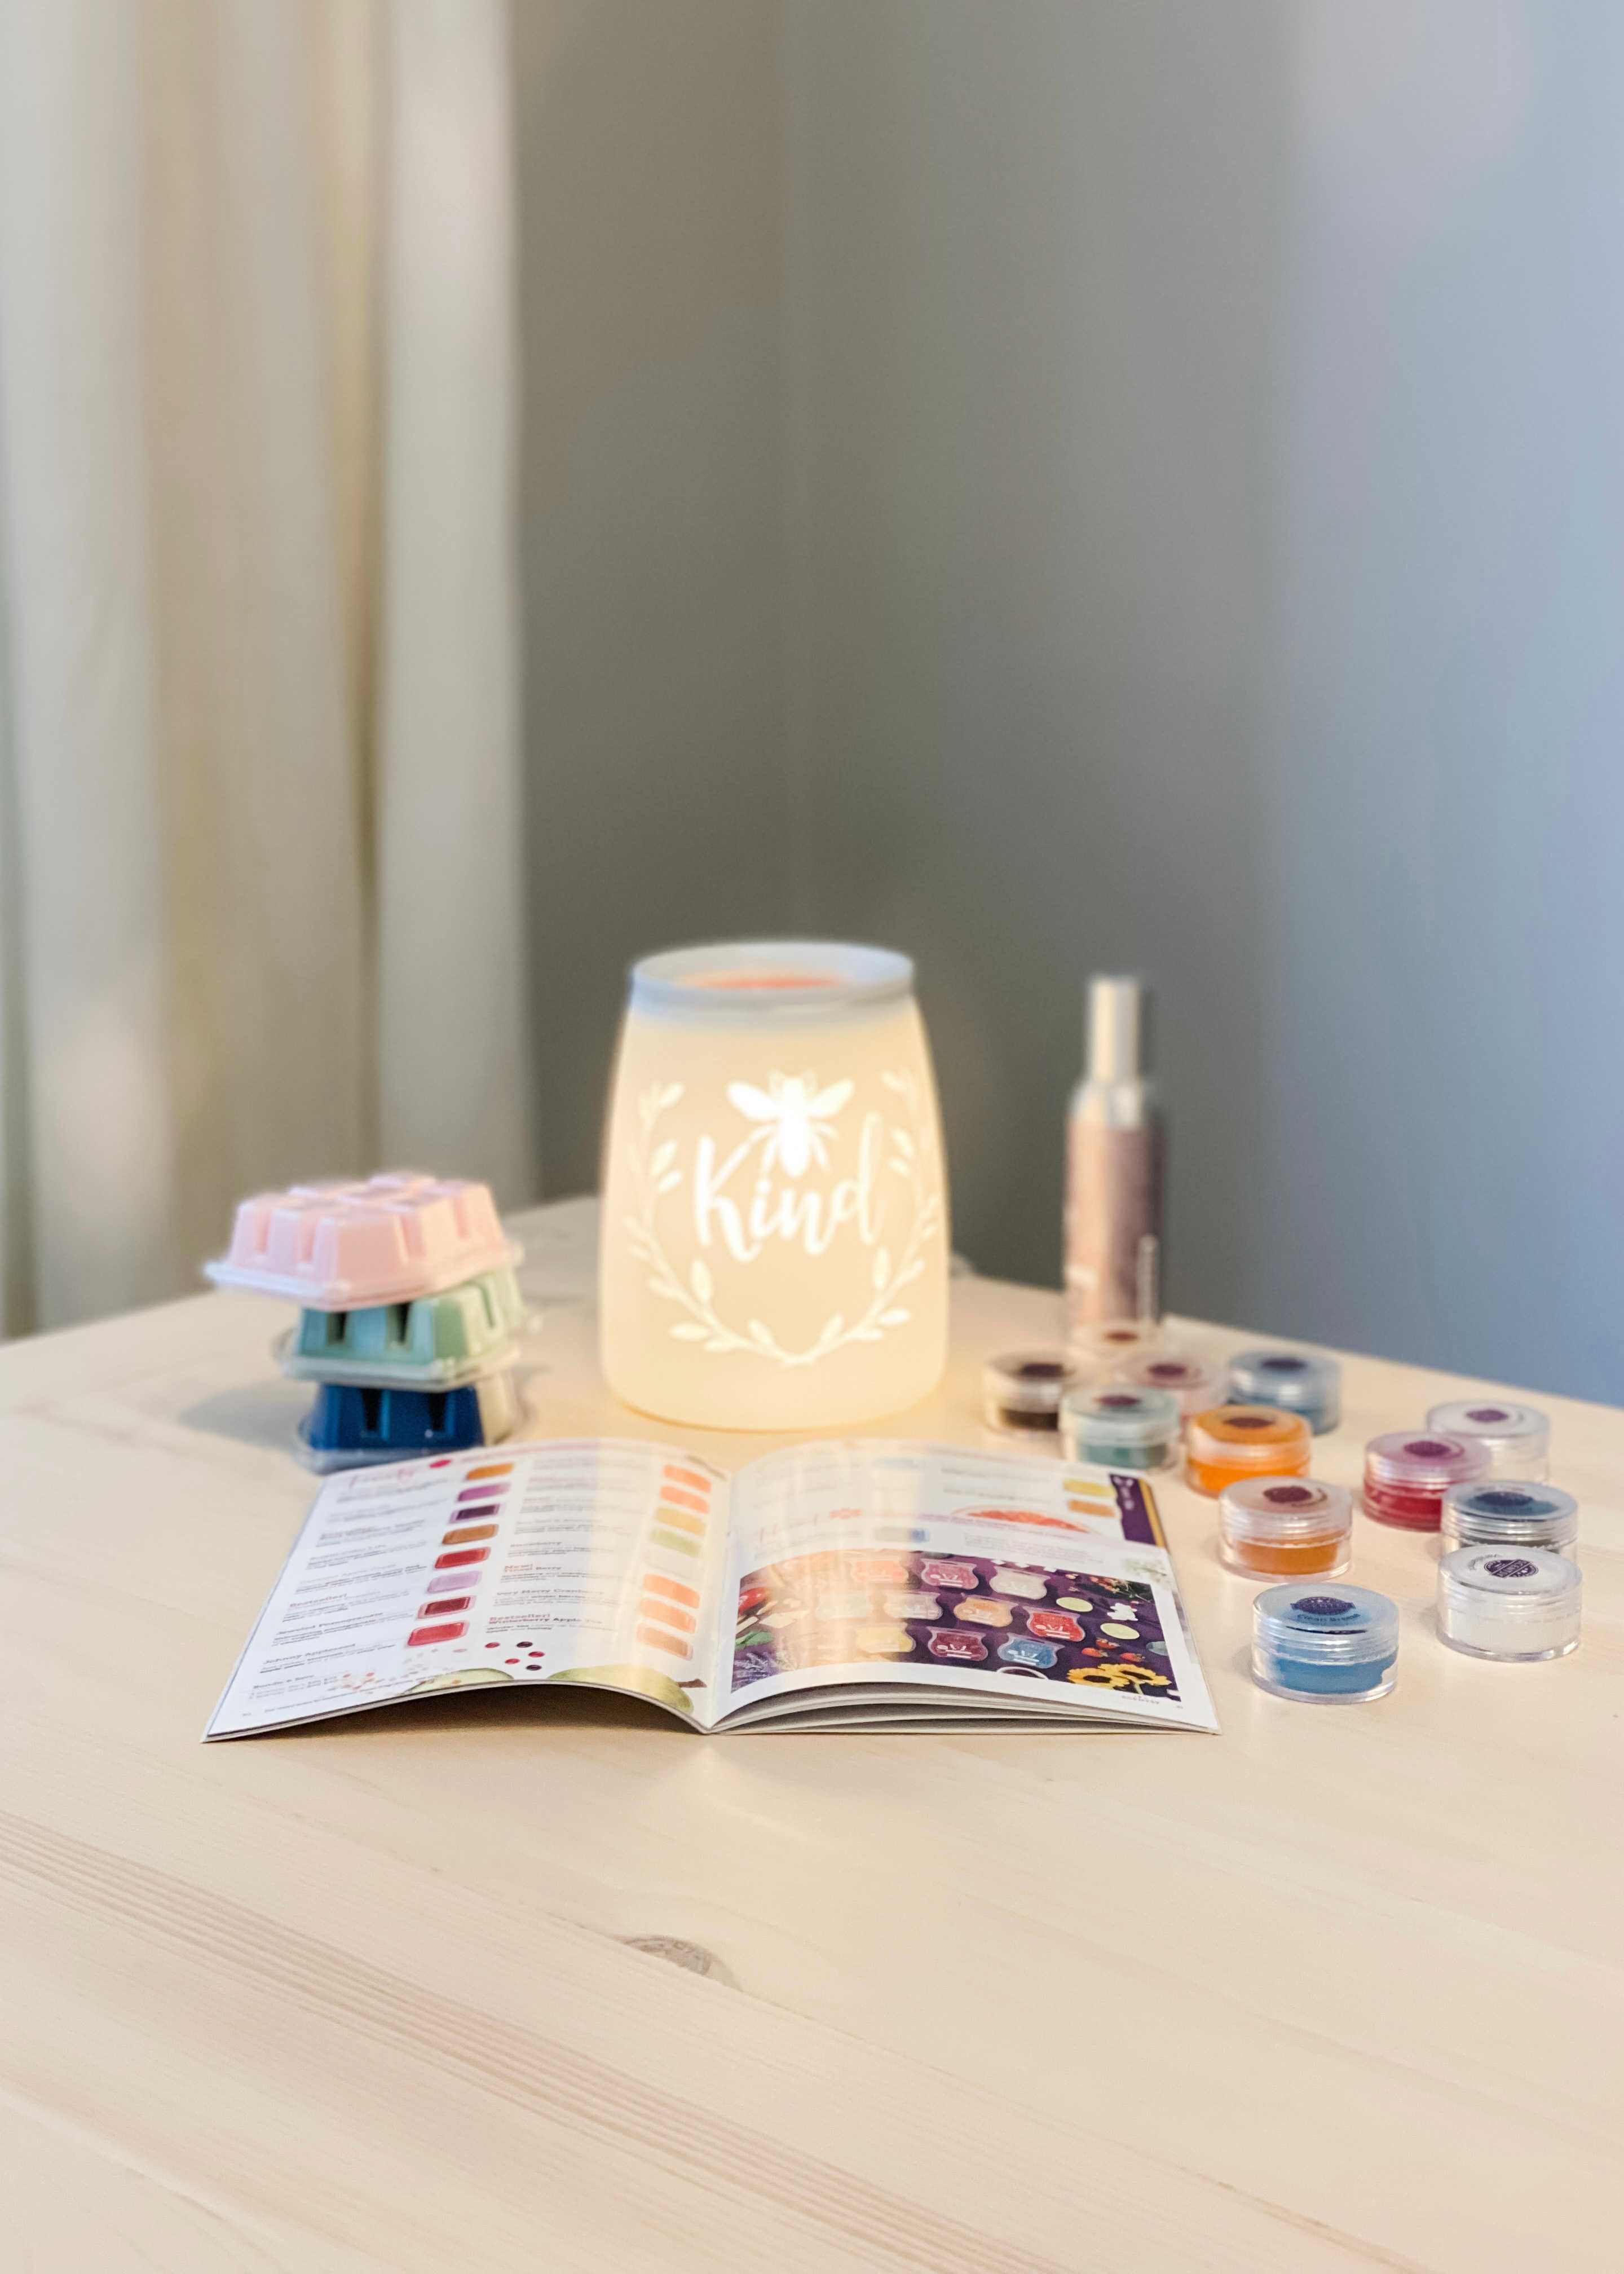 Picture of Scentsy catalog, warmer, wax, and testers on table